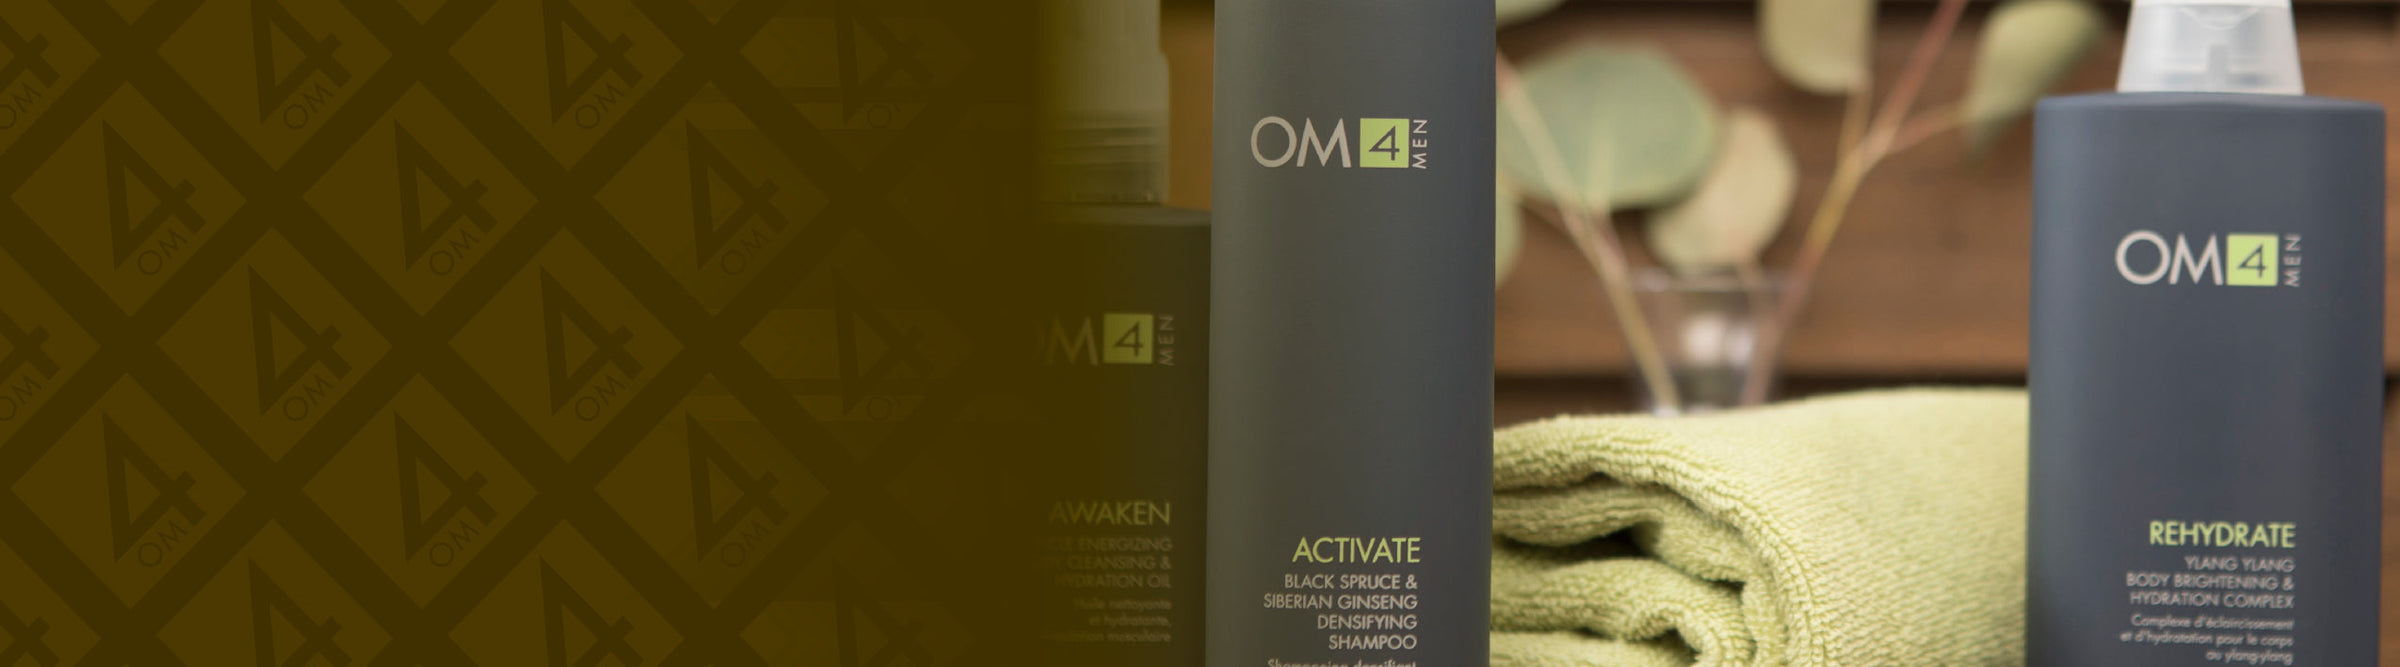 om4 organic male body and hair care